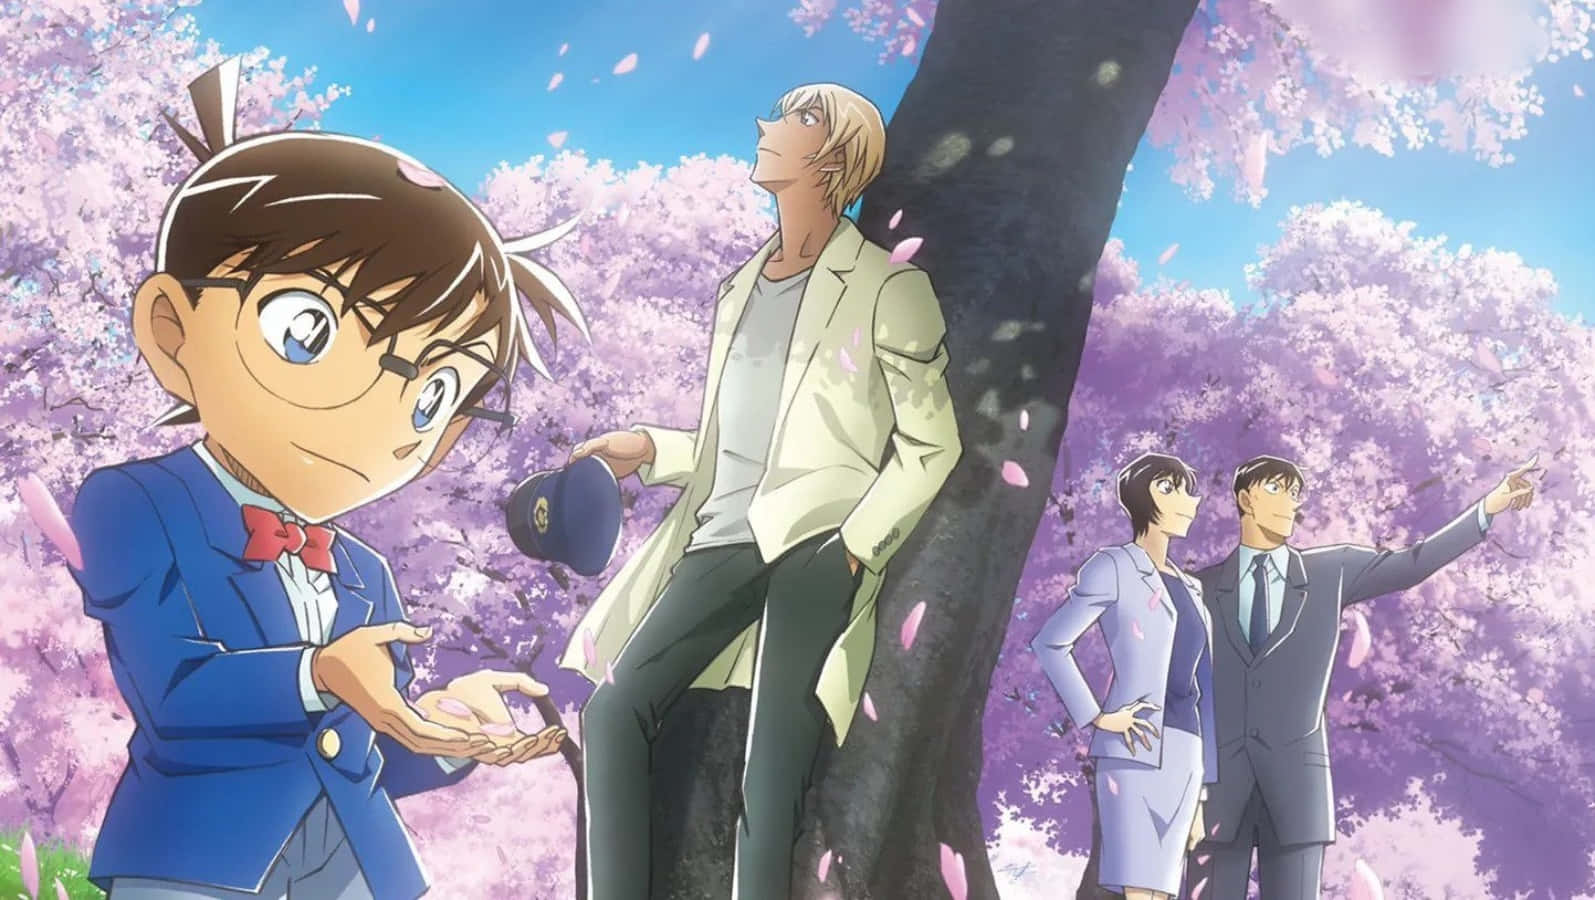 "Solving Mysteries with Sherlock-like Deduction in Detective Conan"